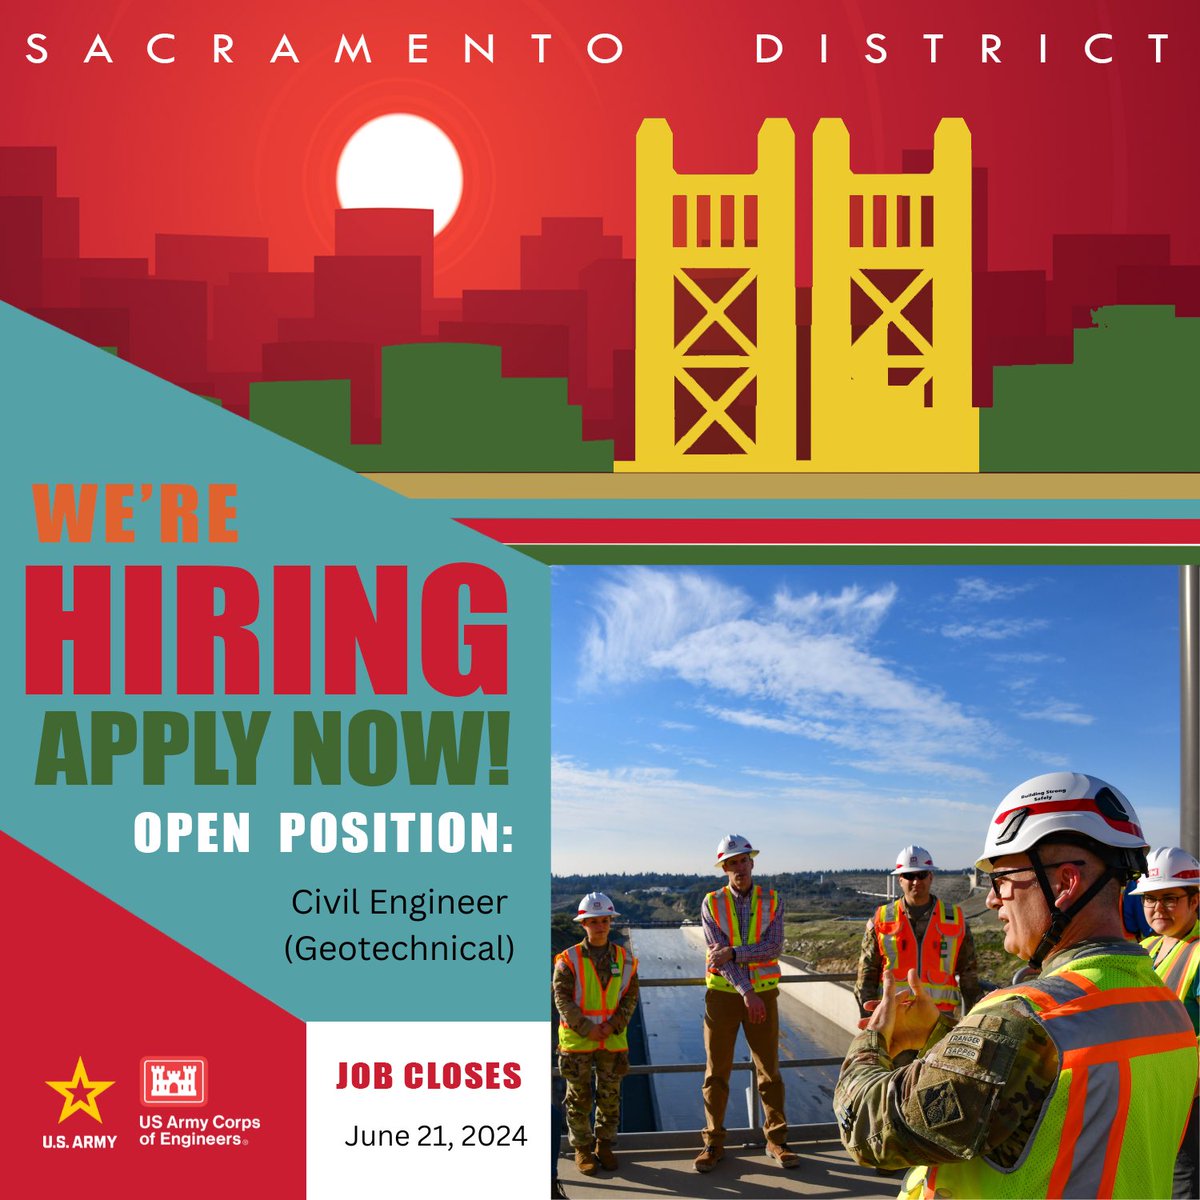 Exciting opportunity! Join our team as a Civil Engineer in our Geotechnical section. In this role, you will develop scopes of work, conduct field investigations, and manage geotechnical staff to ensure project success. To learn more, visit: usajobs.gov/job/782942700